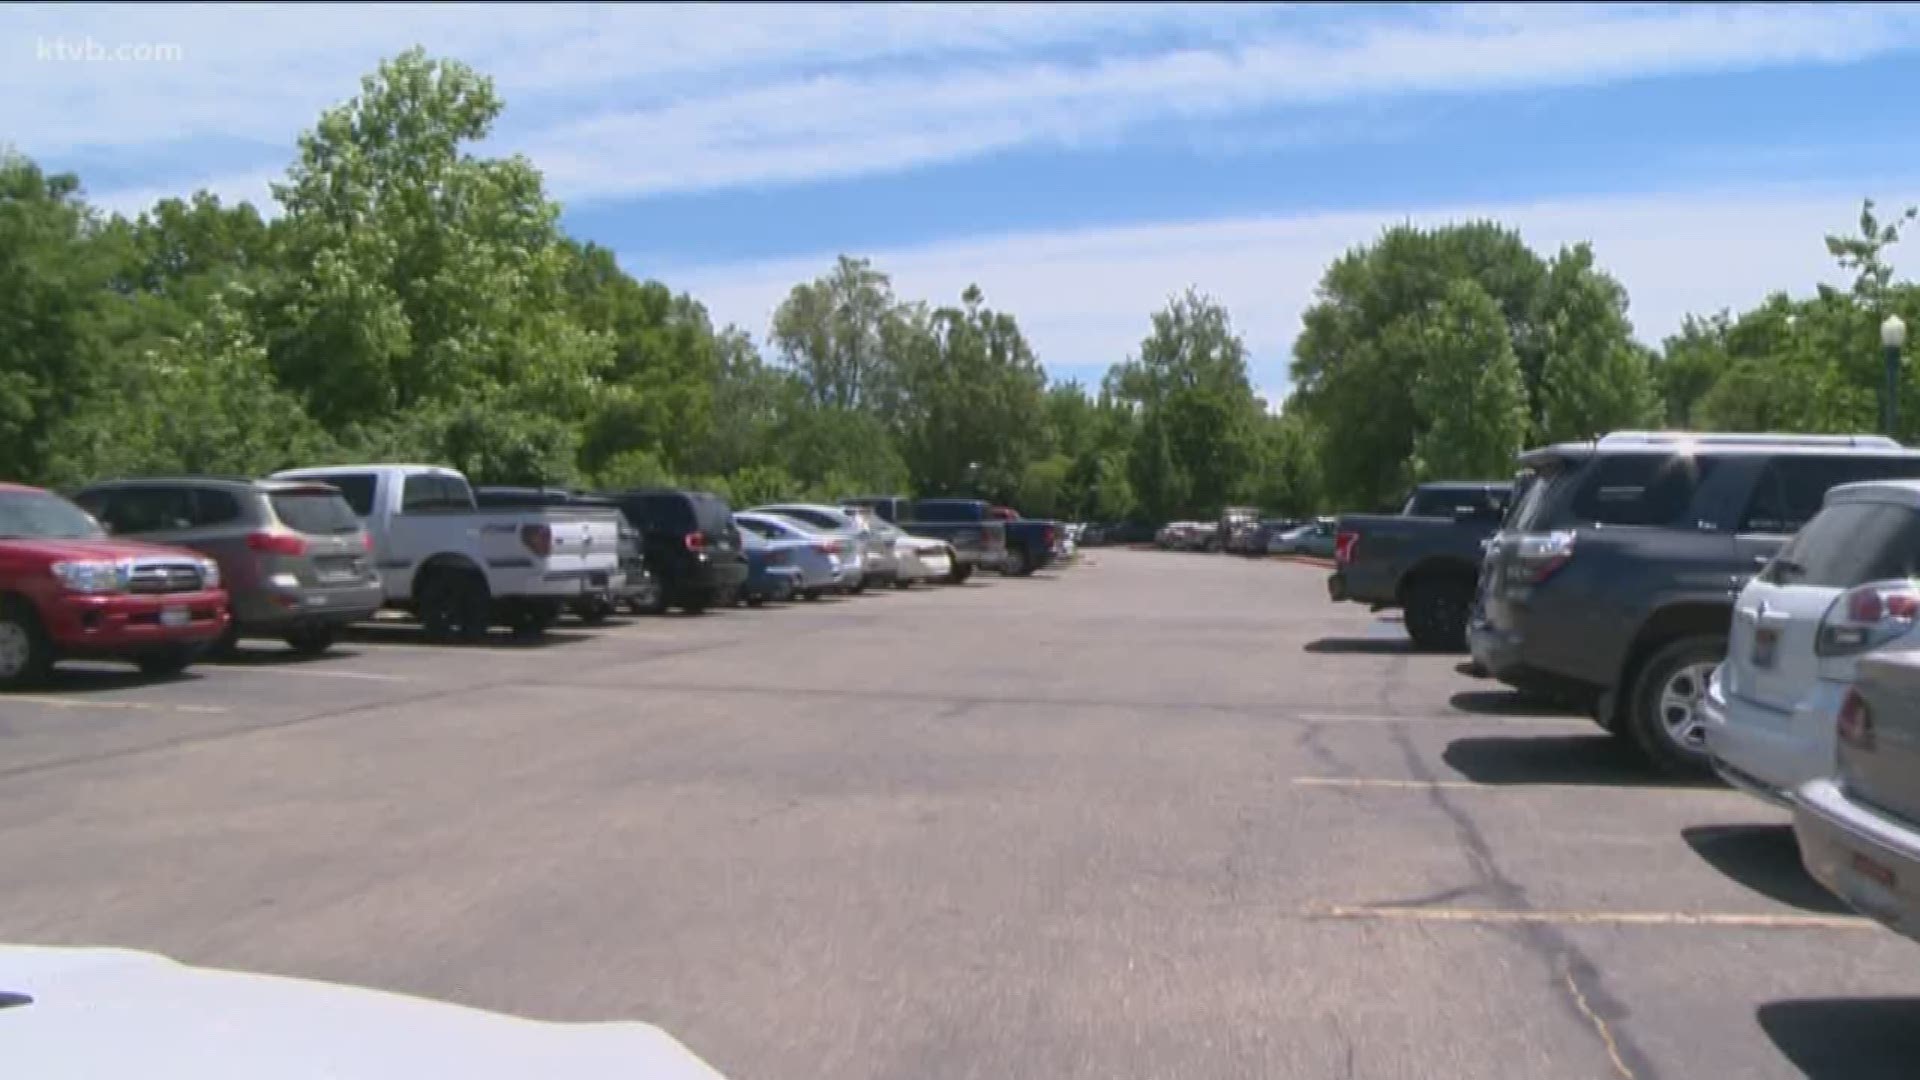 Zoo Boise is trying to come up with a solution to its parking problem while dealing with a growing demand.